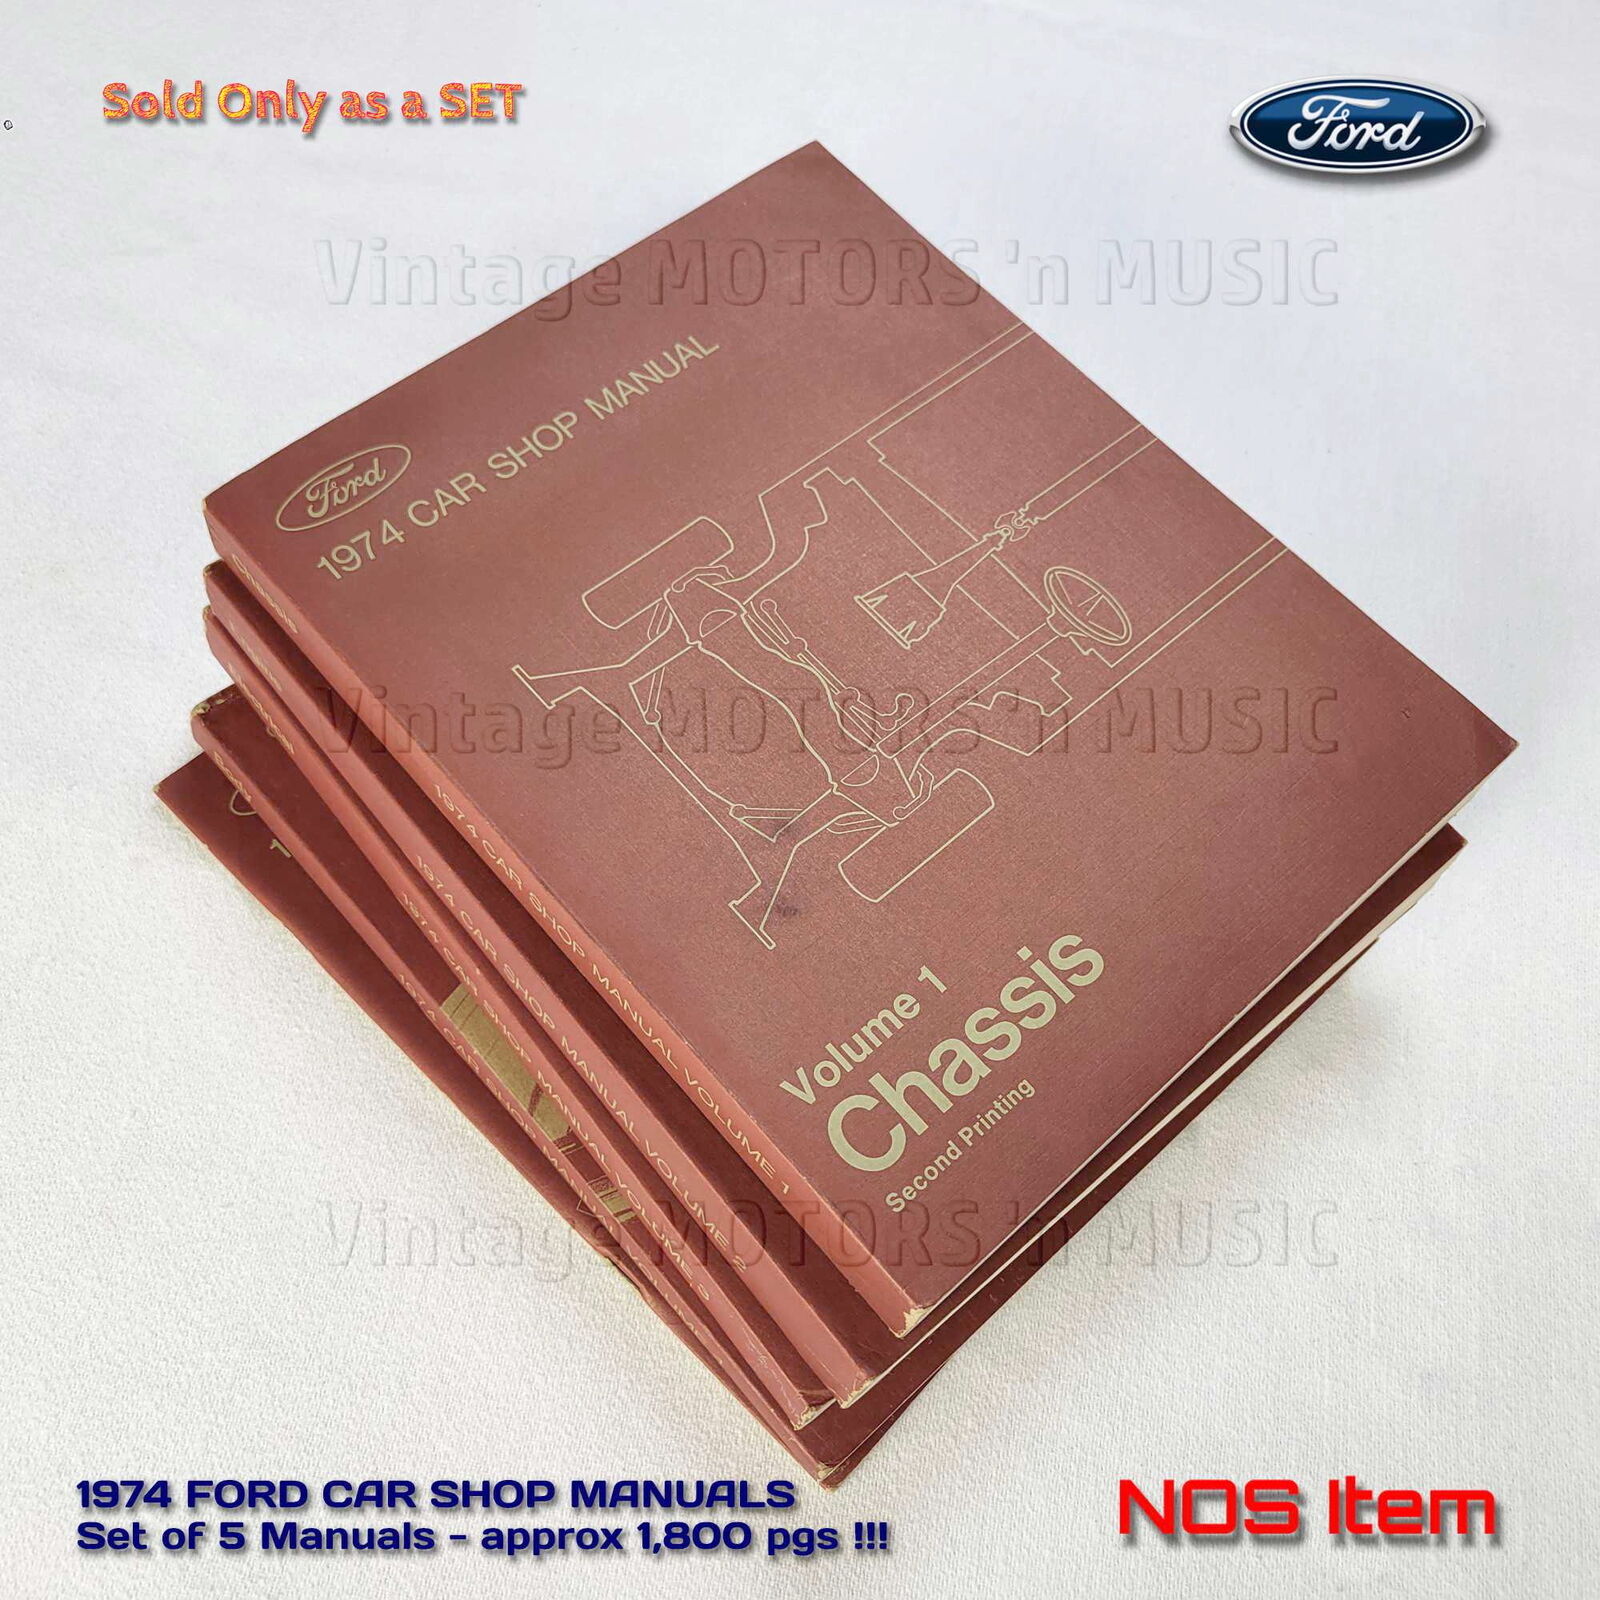 NOS 1974 Ford CAR SHOP MANUALS 2nd Printing - Set of 5 Books ~1,800 Pg EXCELLENT